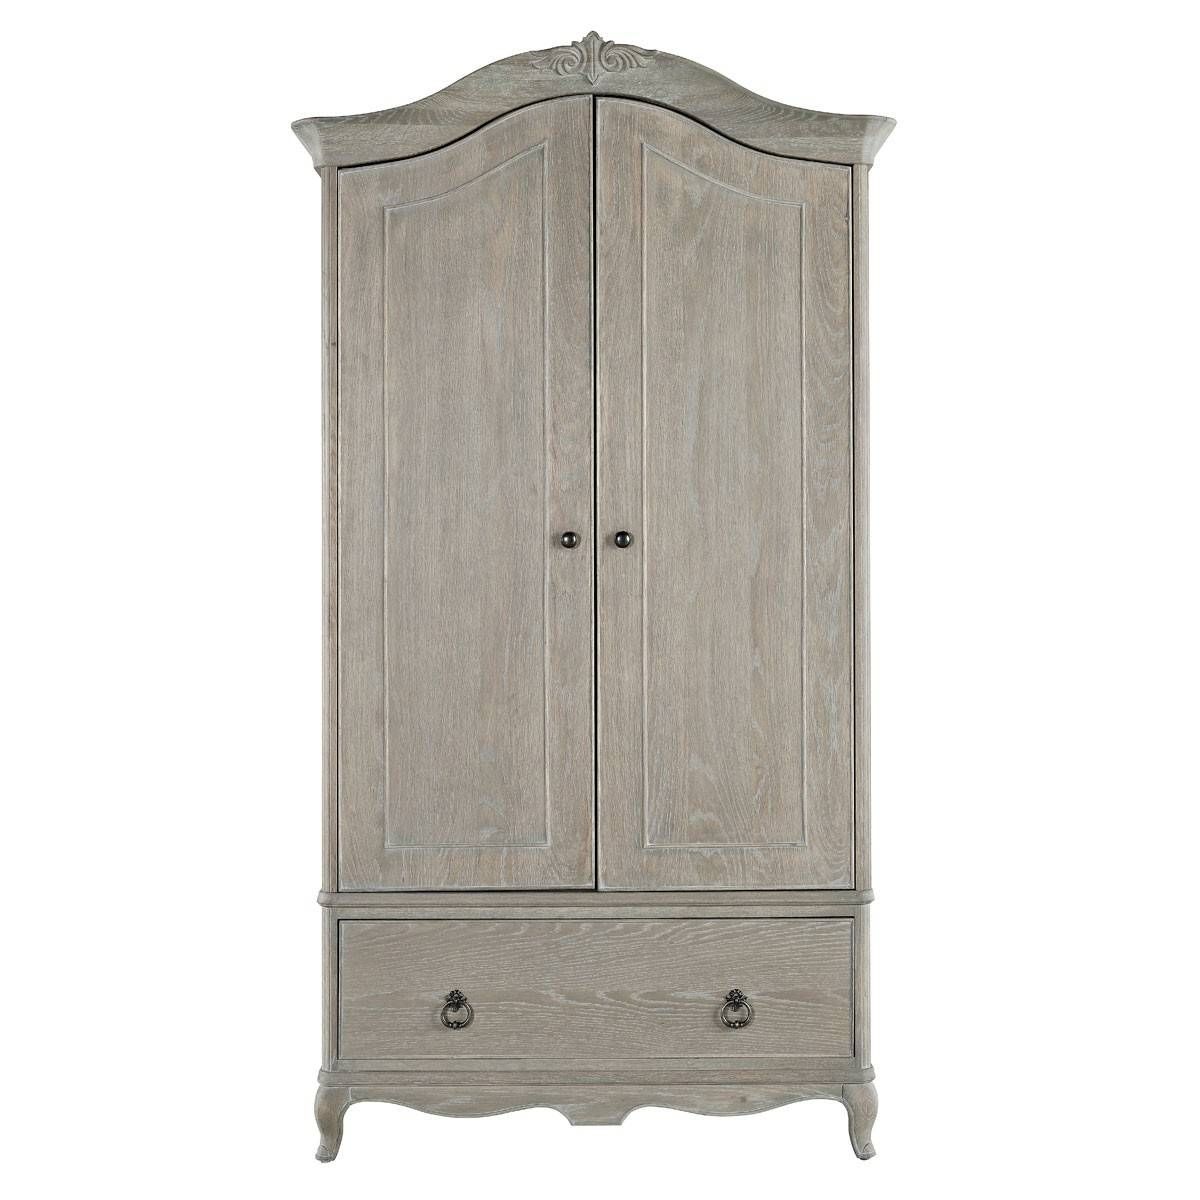 French Style Wardrobes & Armoires – Crown French Furniture With Regard To Black French Style Wardrobes (View 13 of 15)